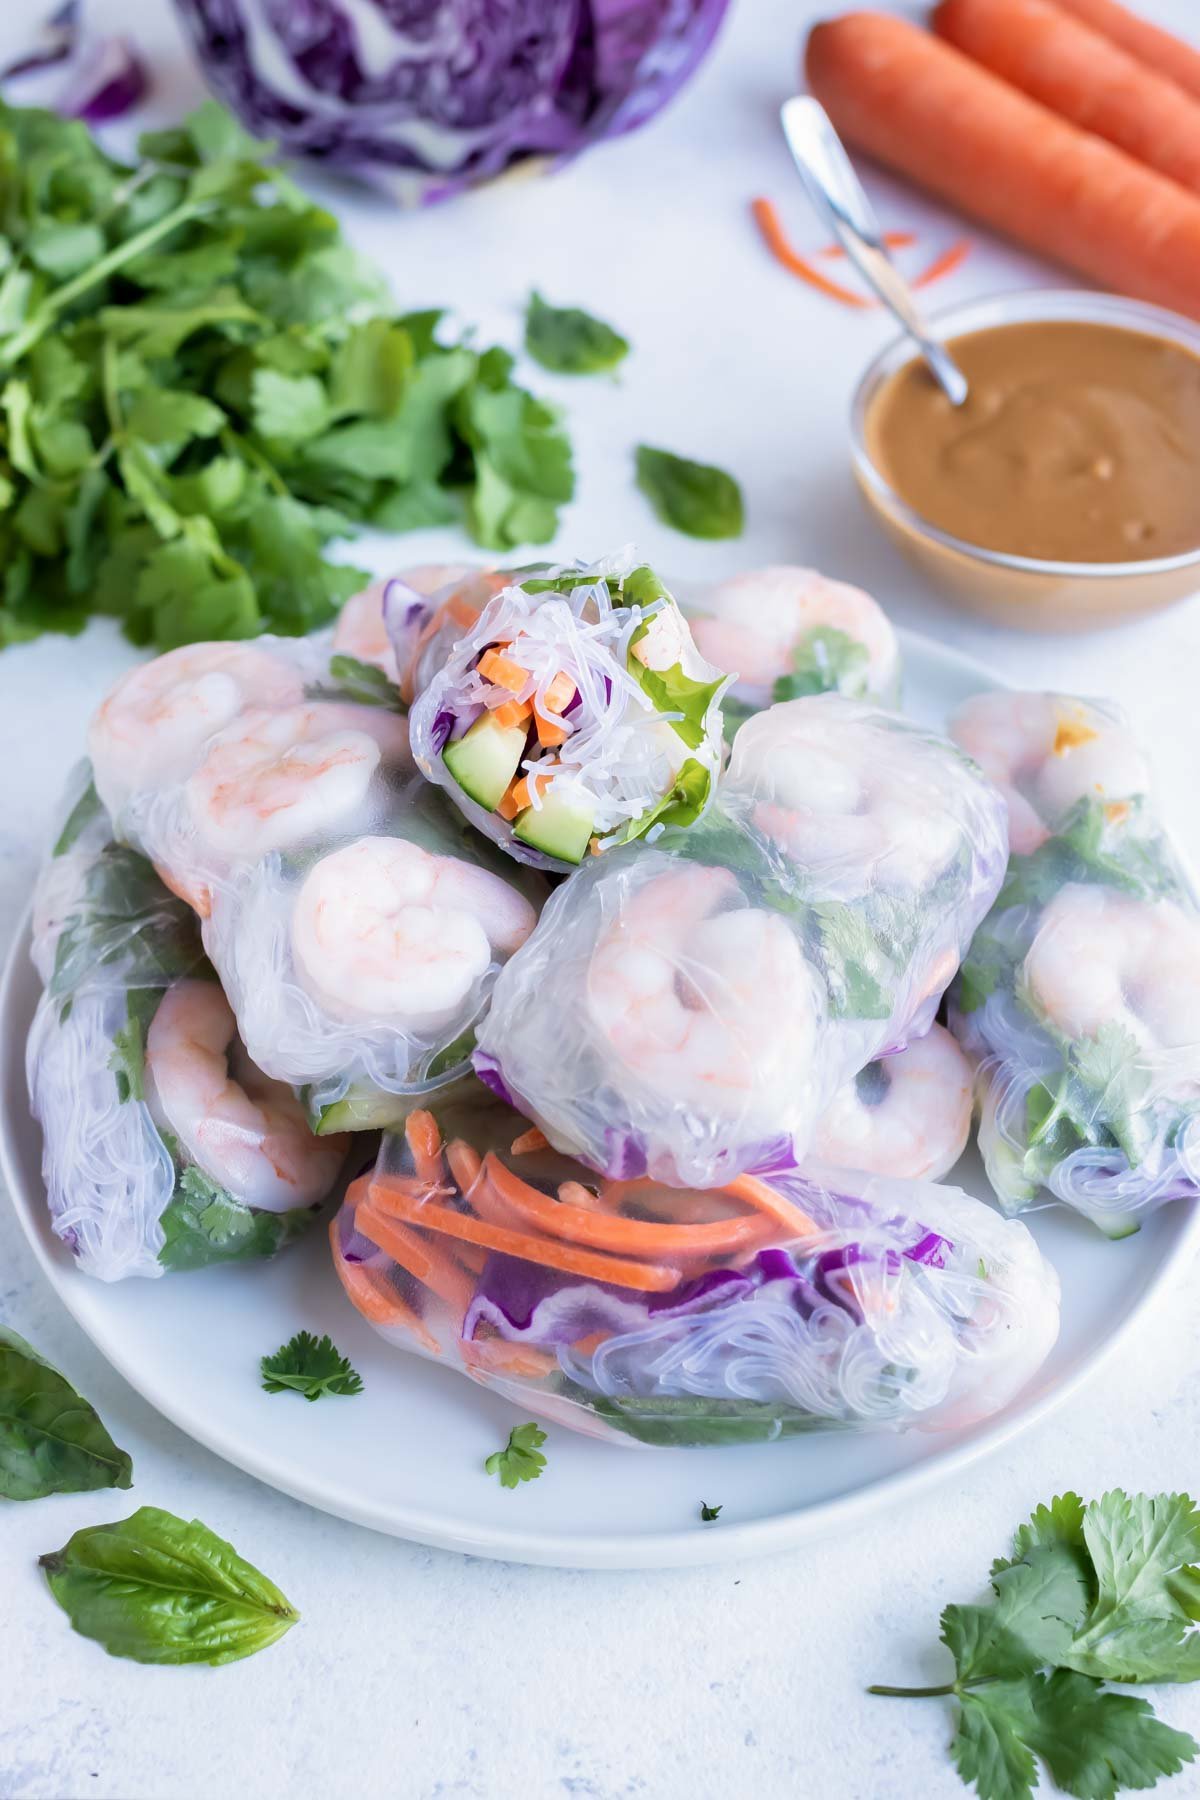 Authentic spring rolls are served on a white plate.